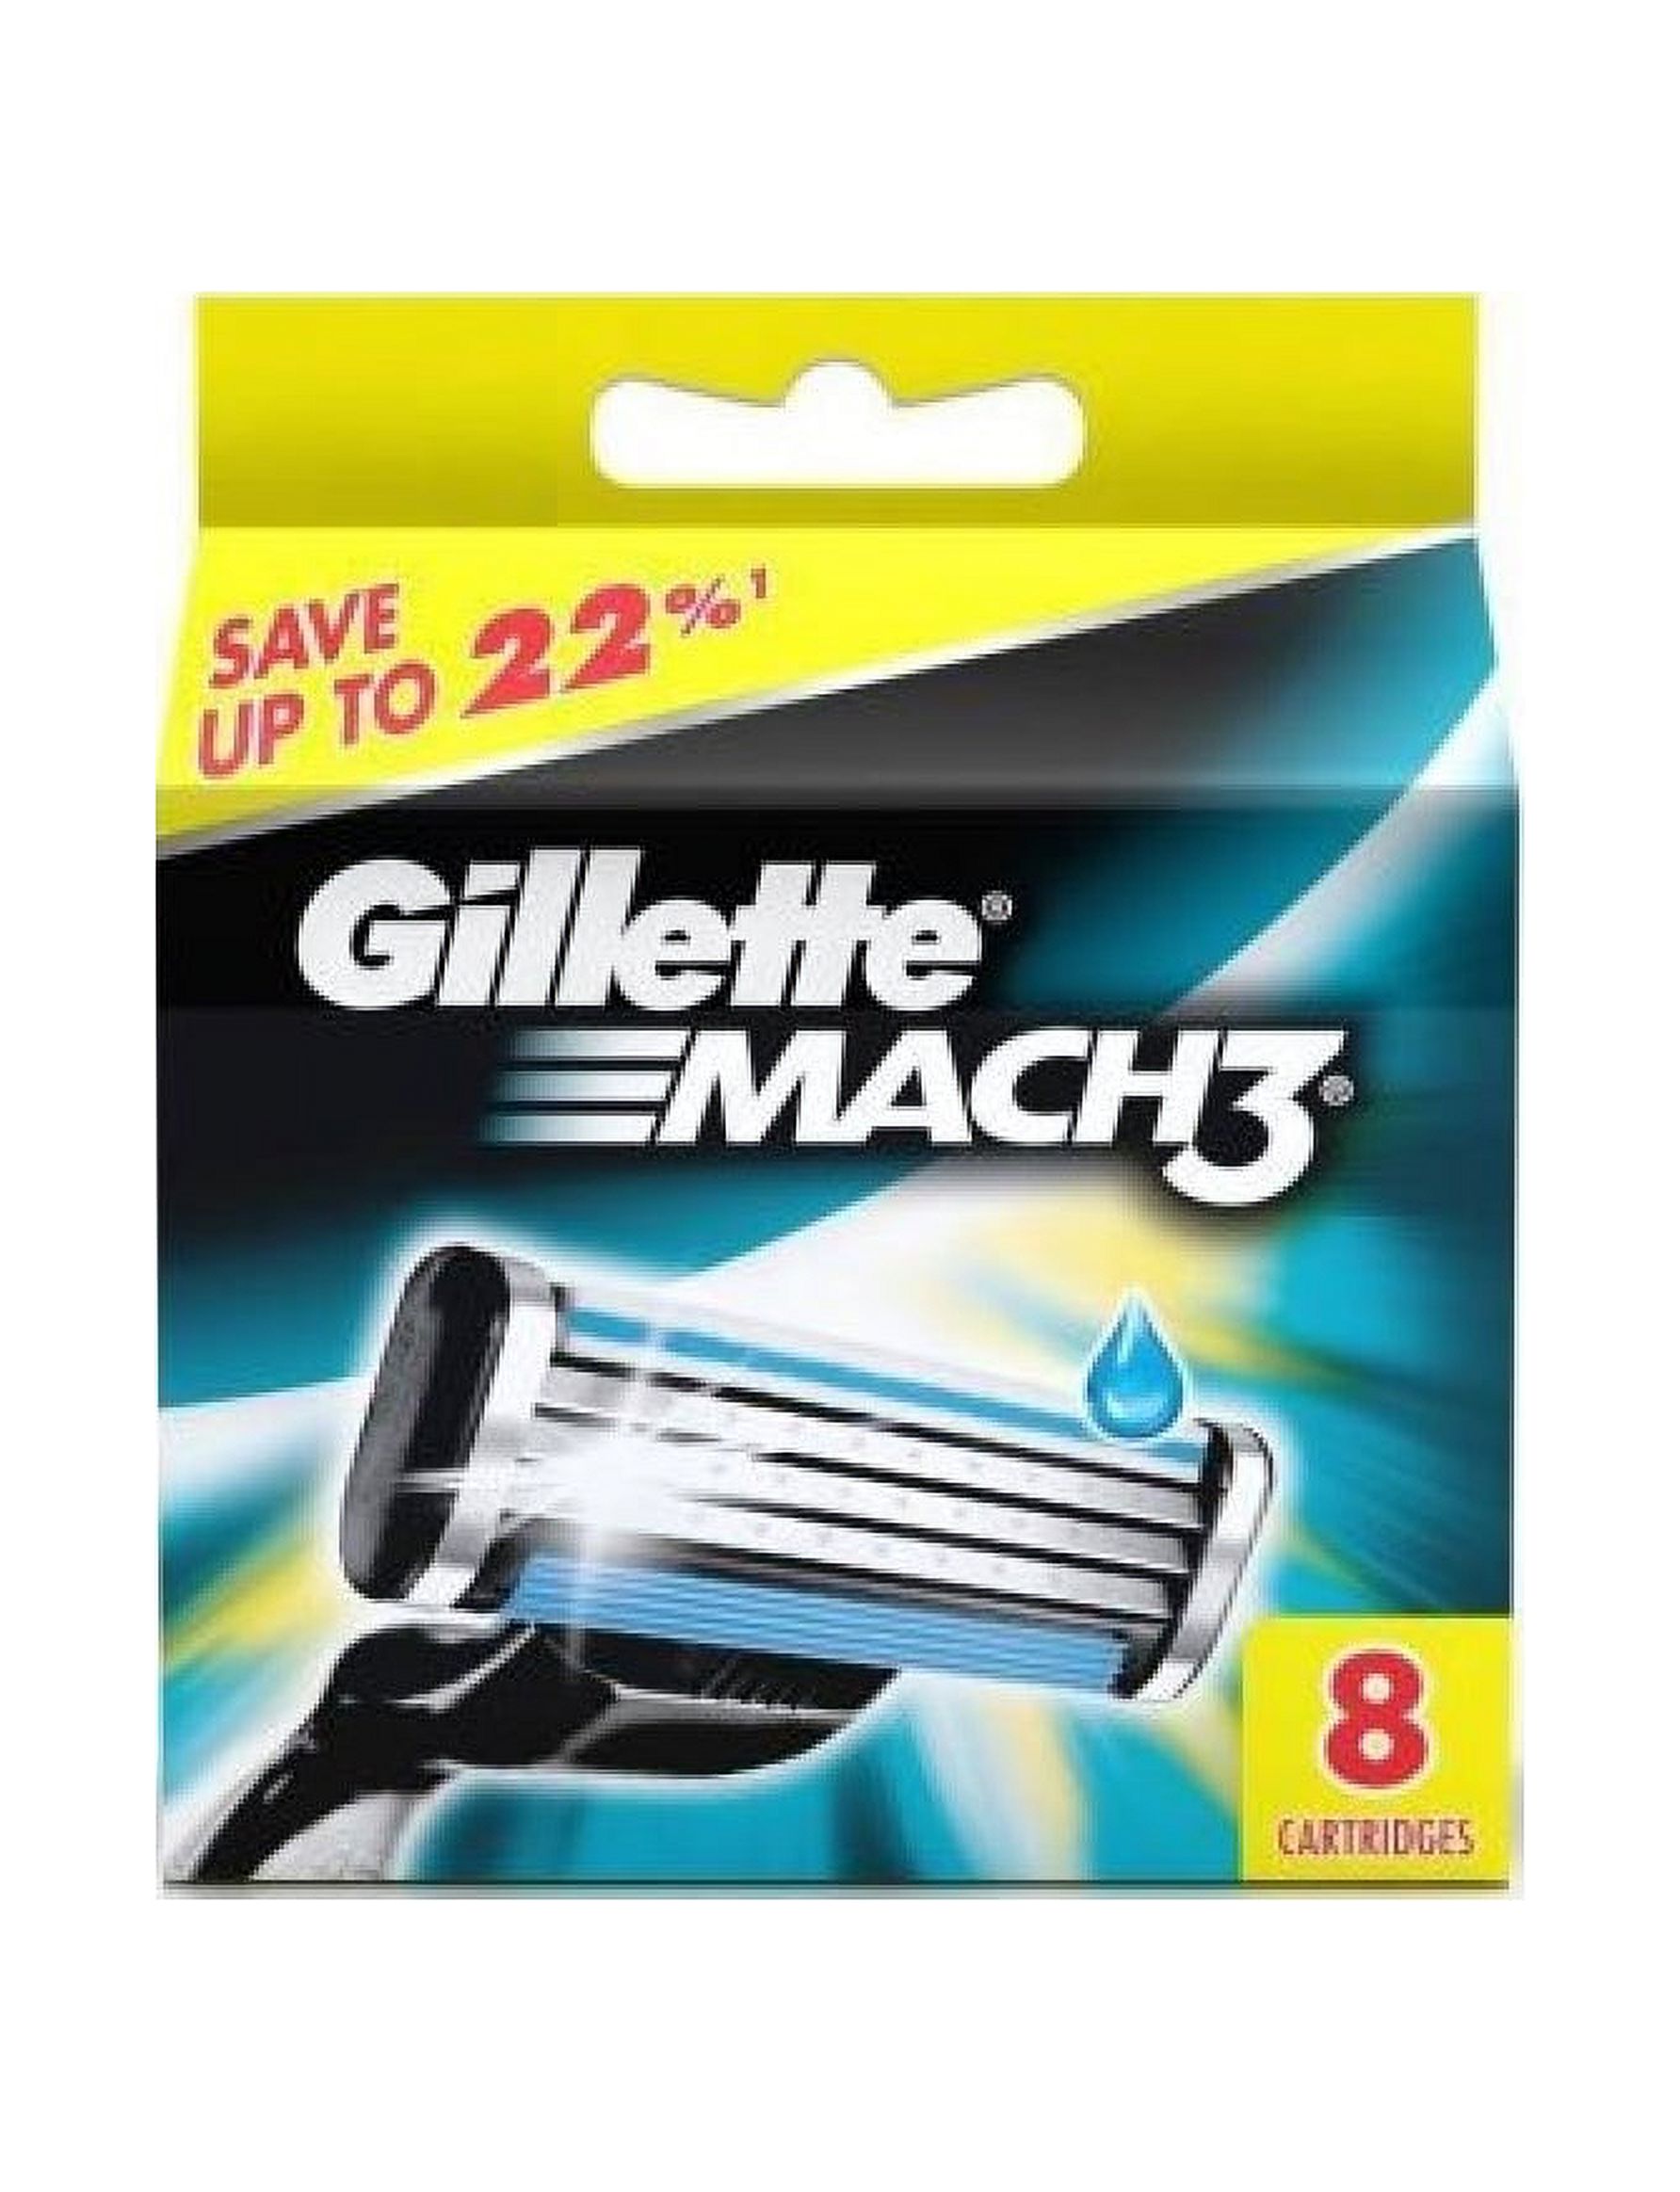 Gillette Mach3 Refill Razor Blade Cartridges, 2 Count (Pack of 4) - image 1 of 1